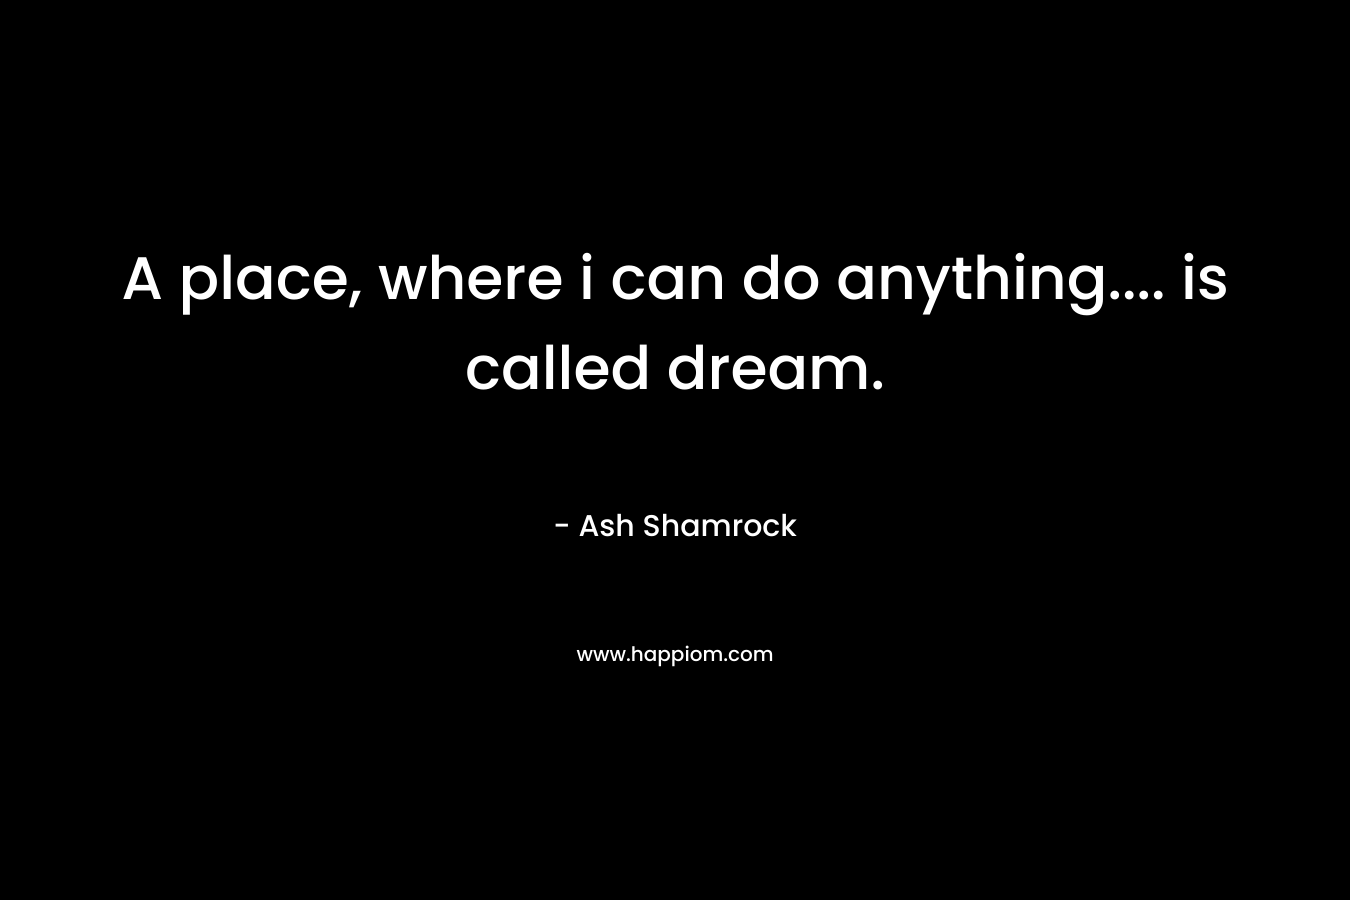 A place, where i can do anything.... is called dream.